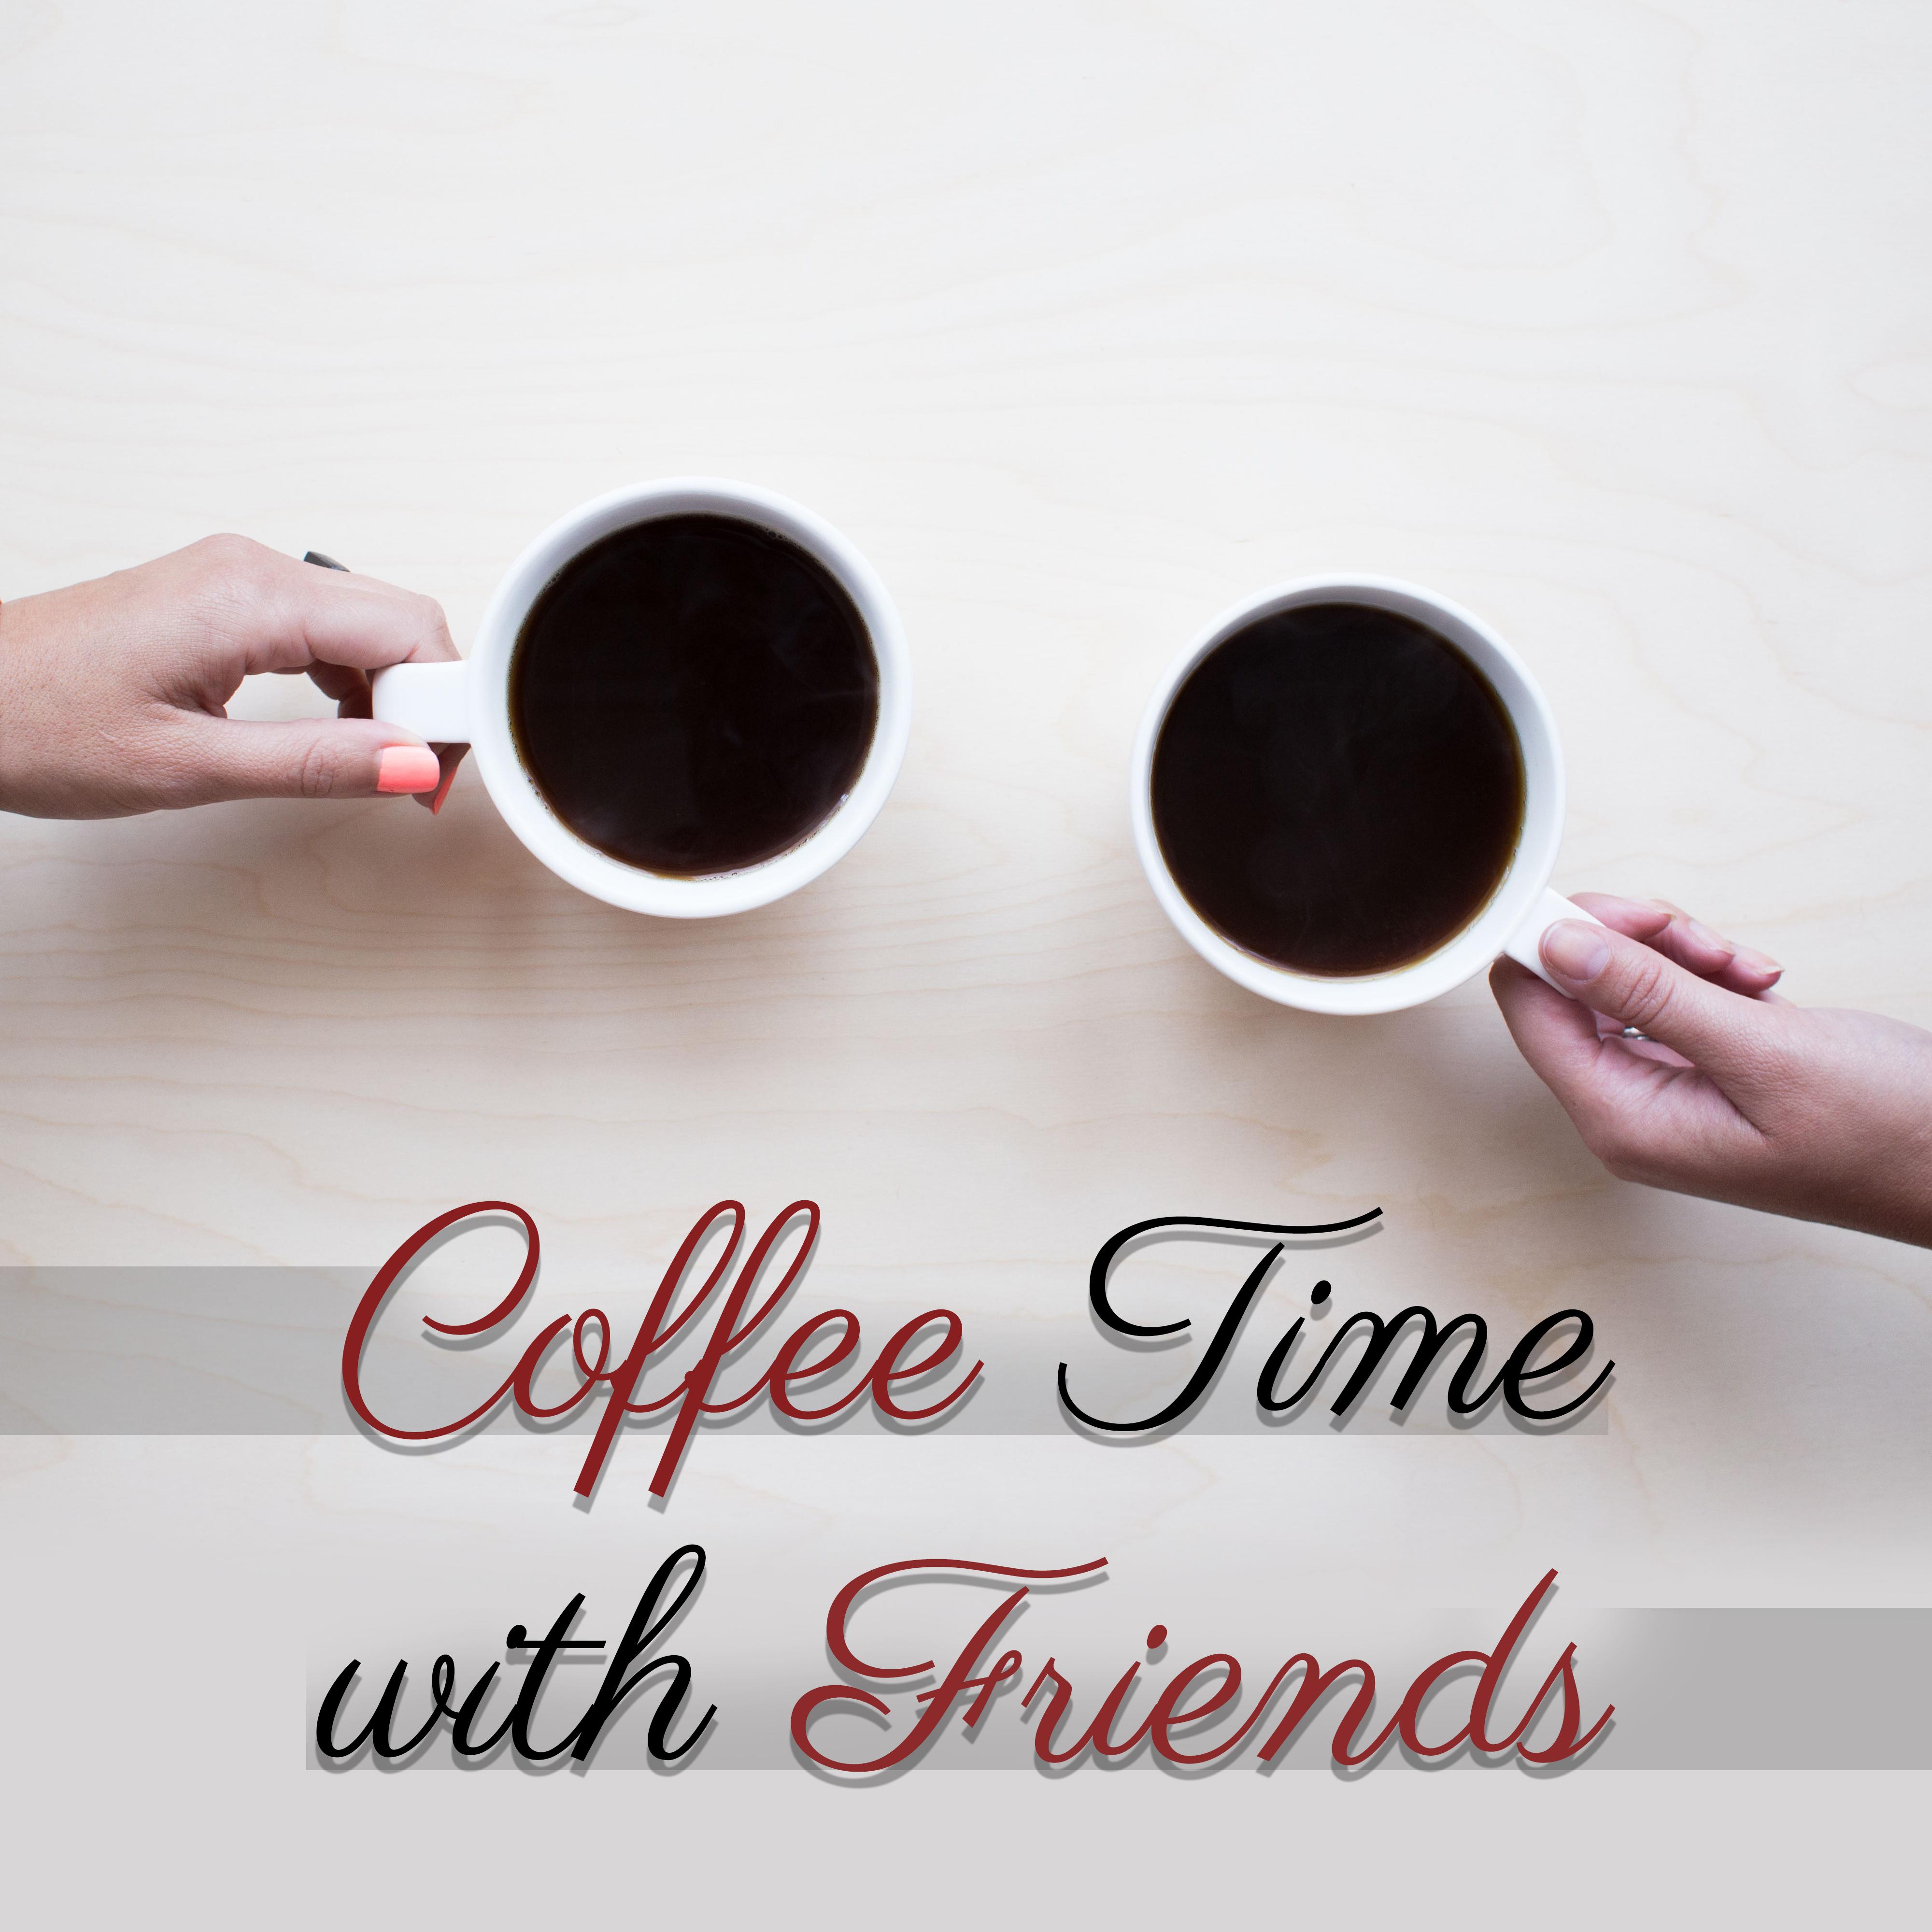 Coffee Time with Friends  Restaurant Jazz Music, Instrumental Piano, Jazz Cafe, Deep Relax, Smooth Jazz, Chillout, Calming Songs